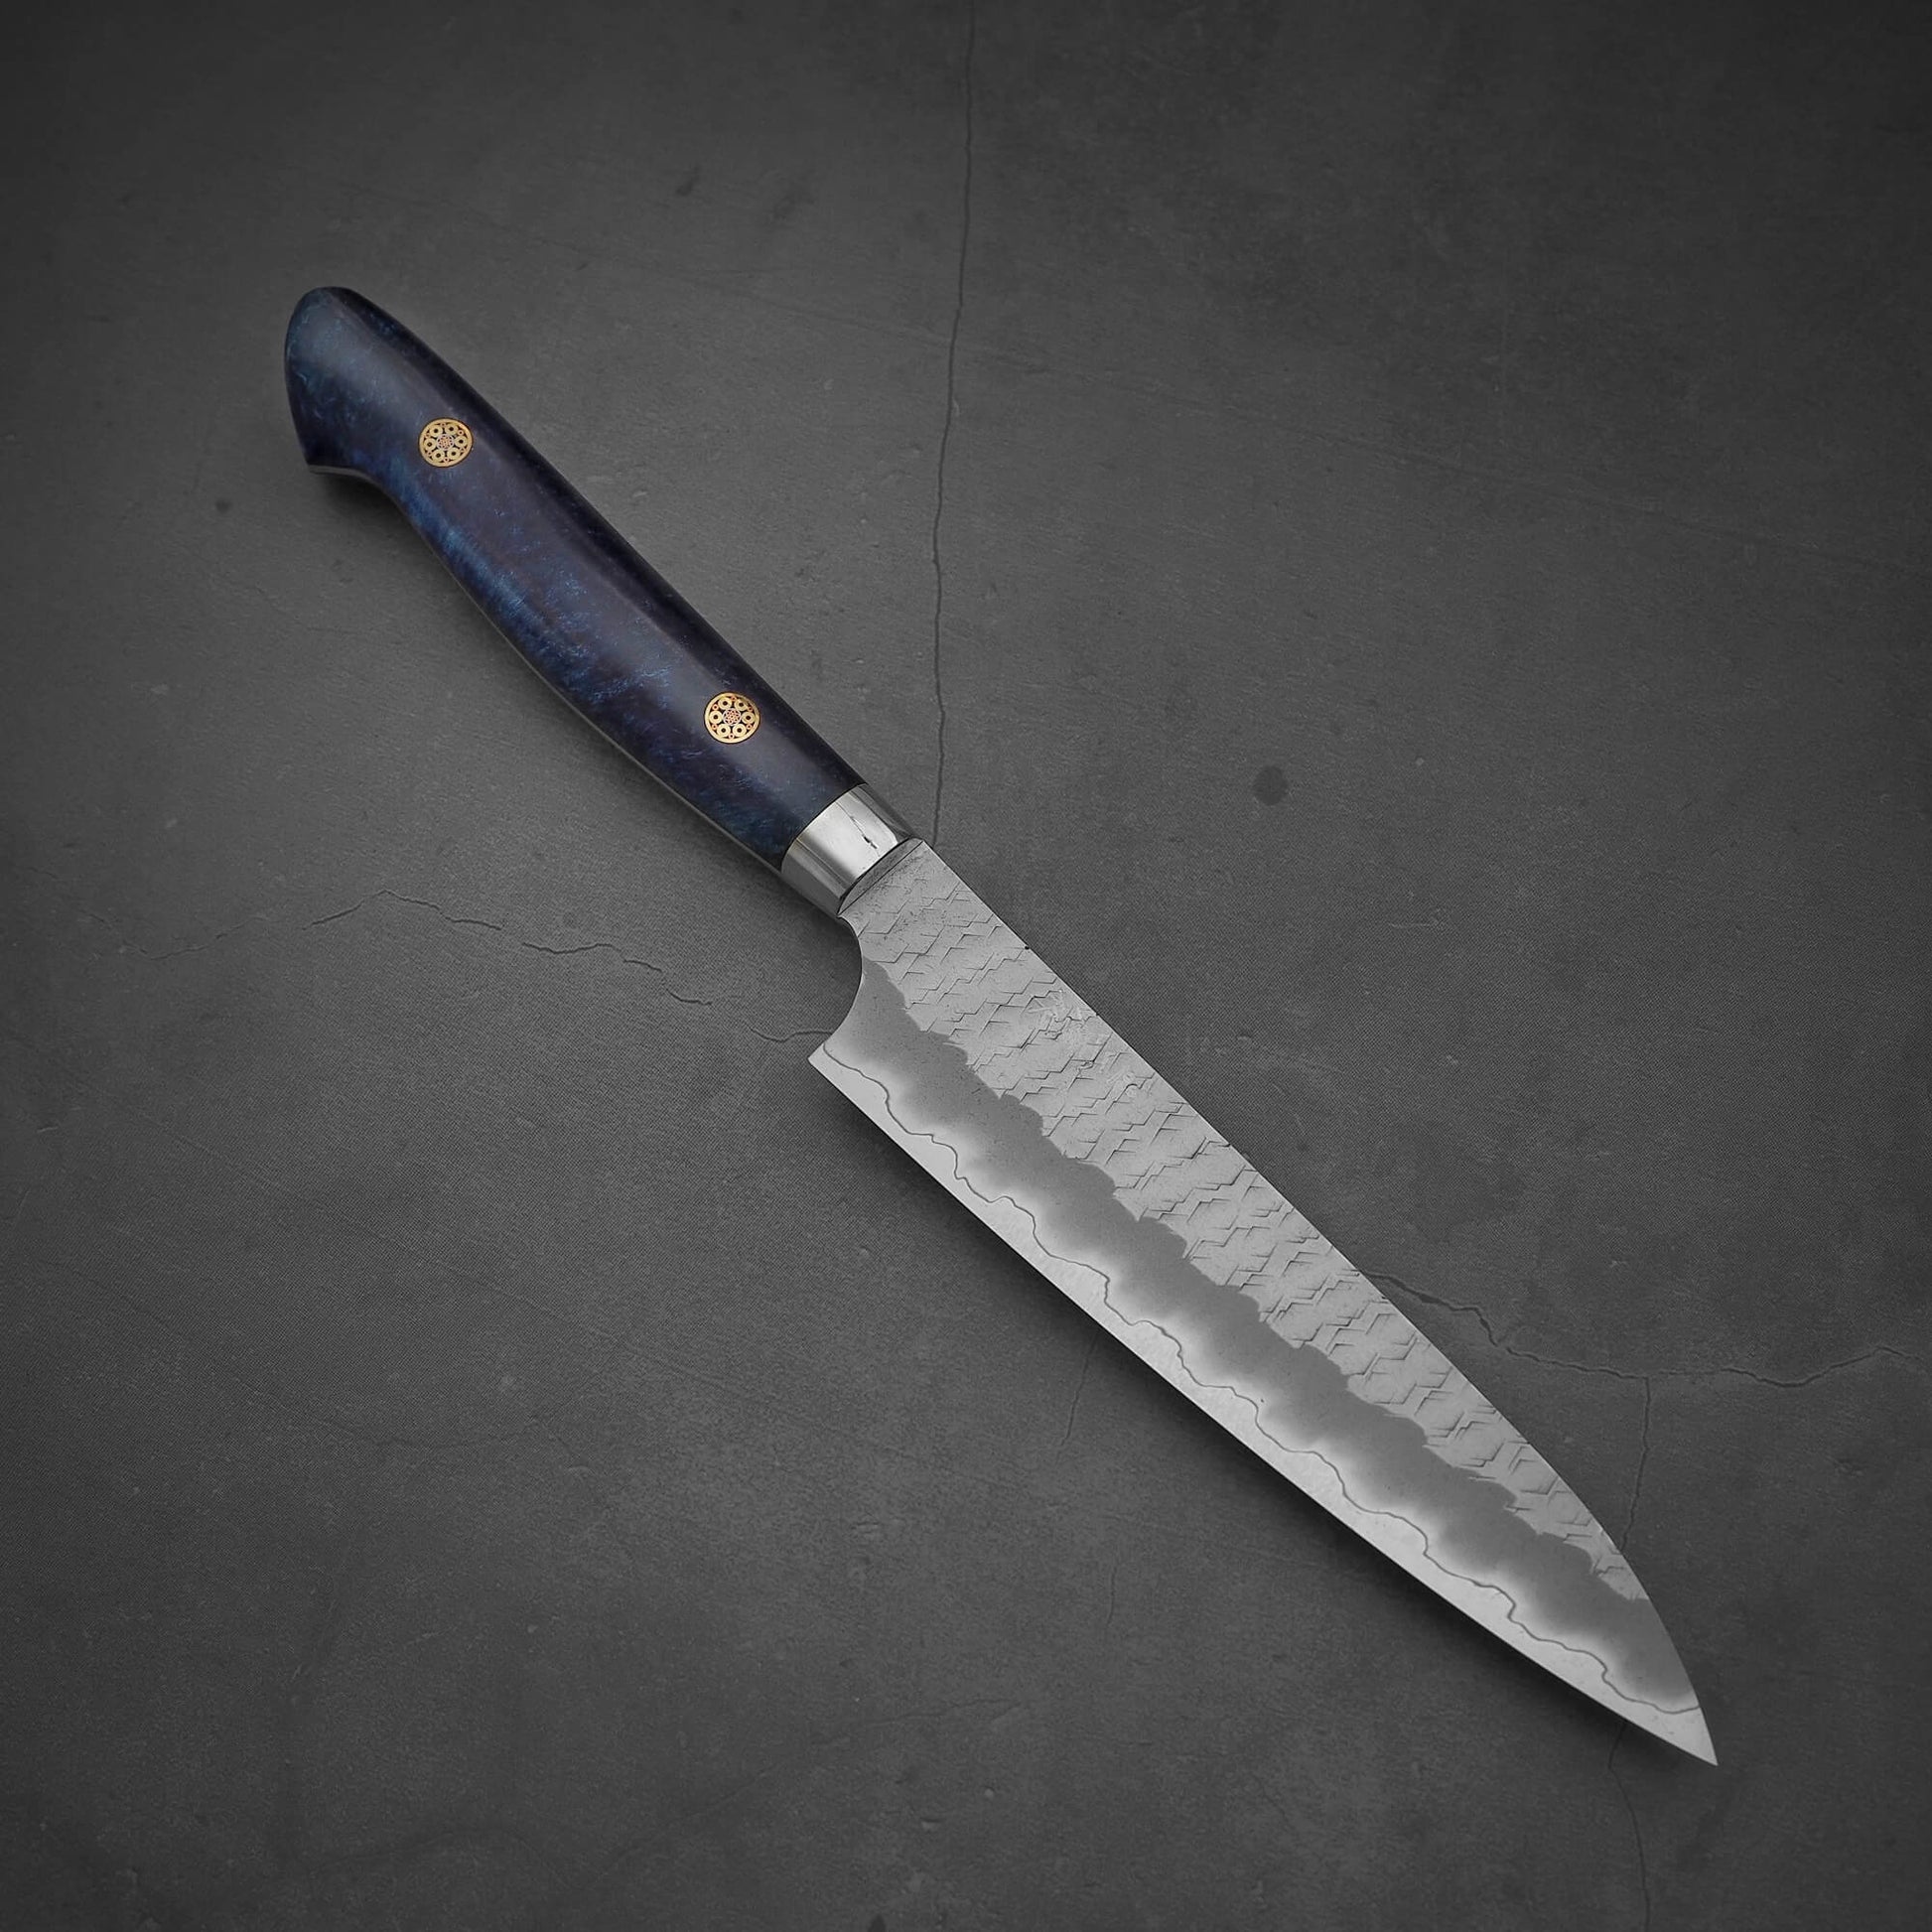 Top view of the Nigara tsuchime SG2 petty knife 150mm in a diagonal position where the tip is facing the bottom right